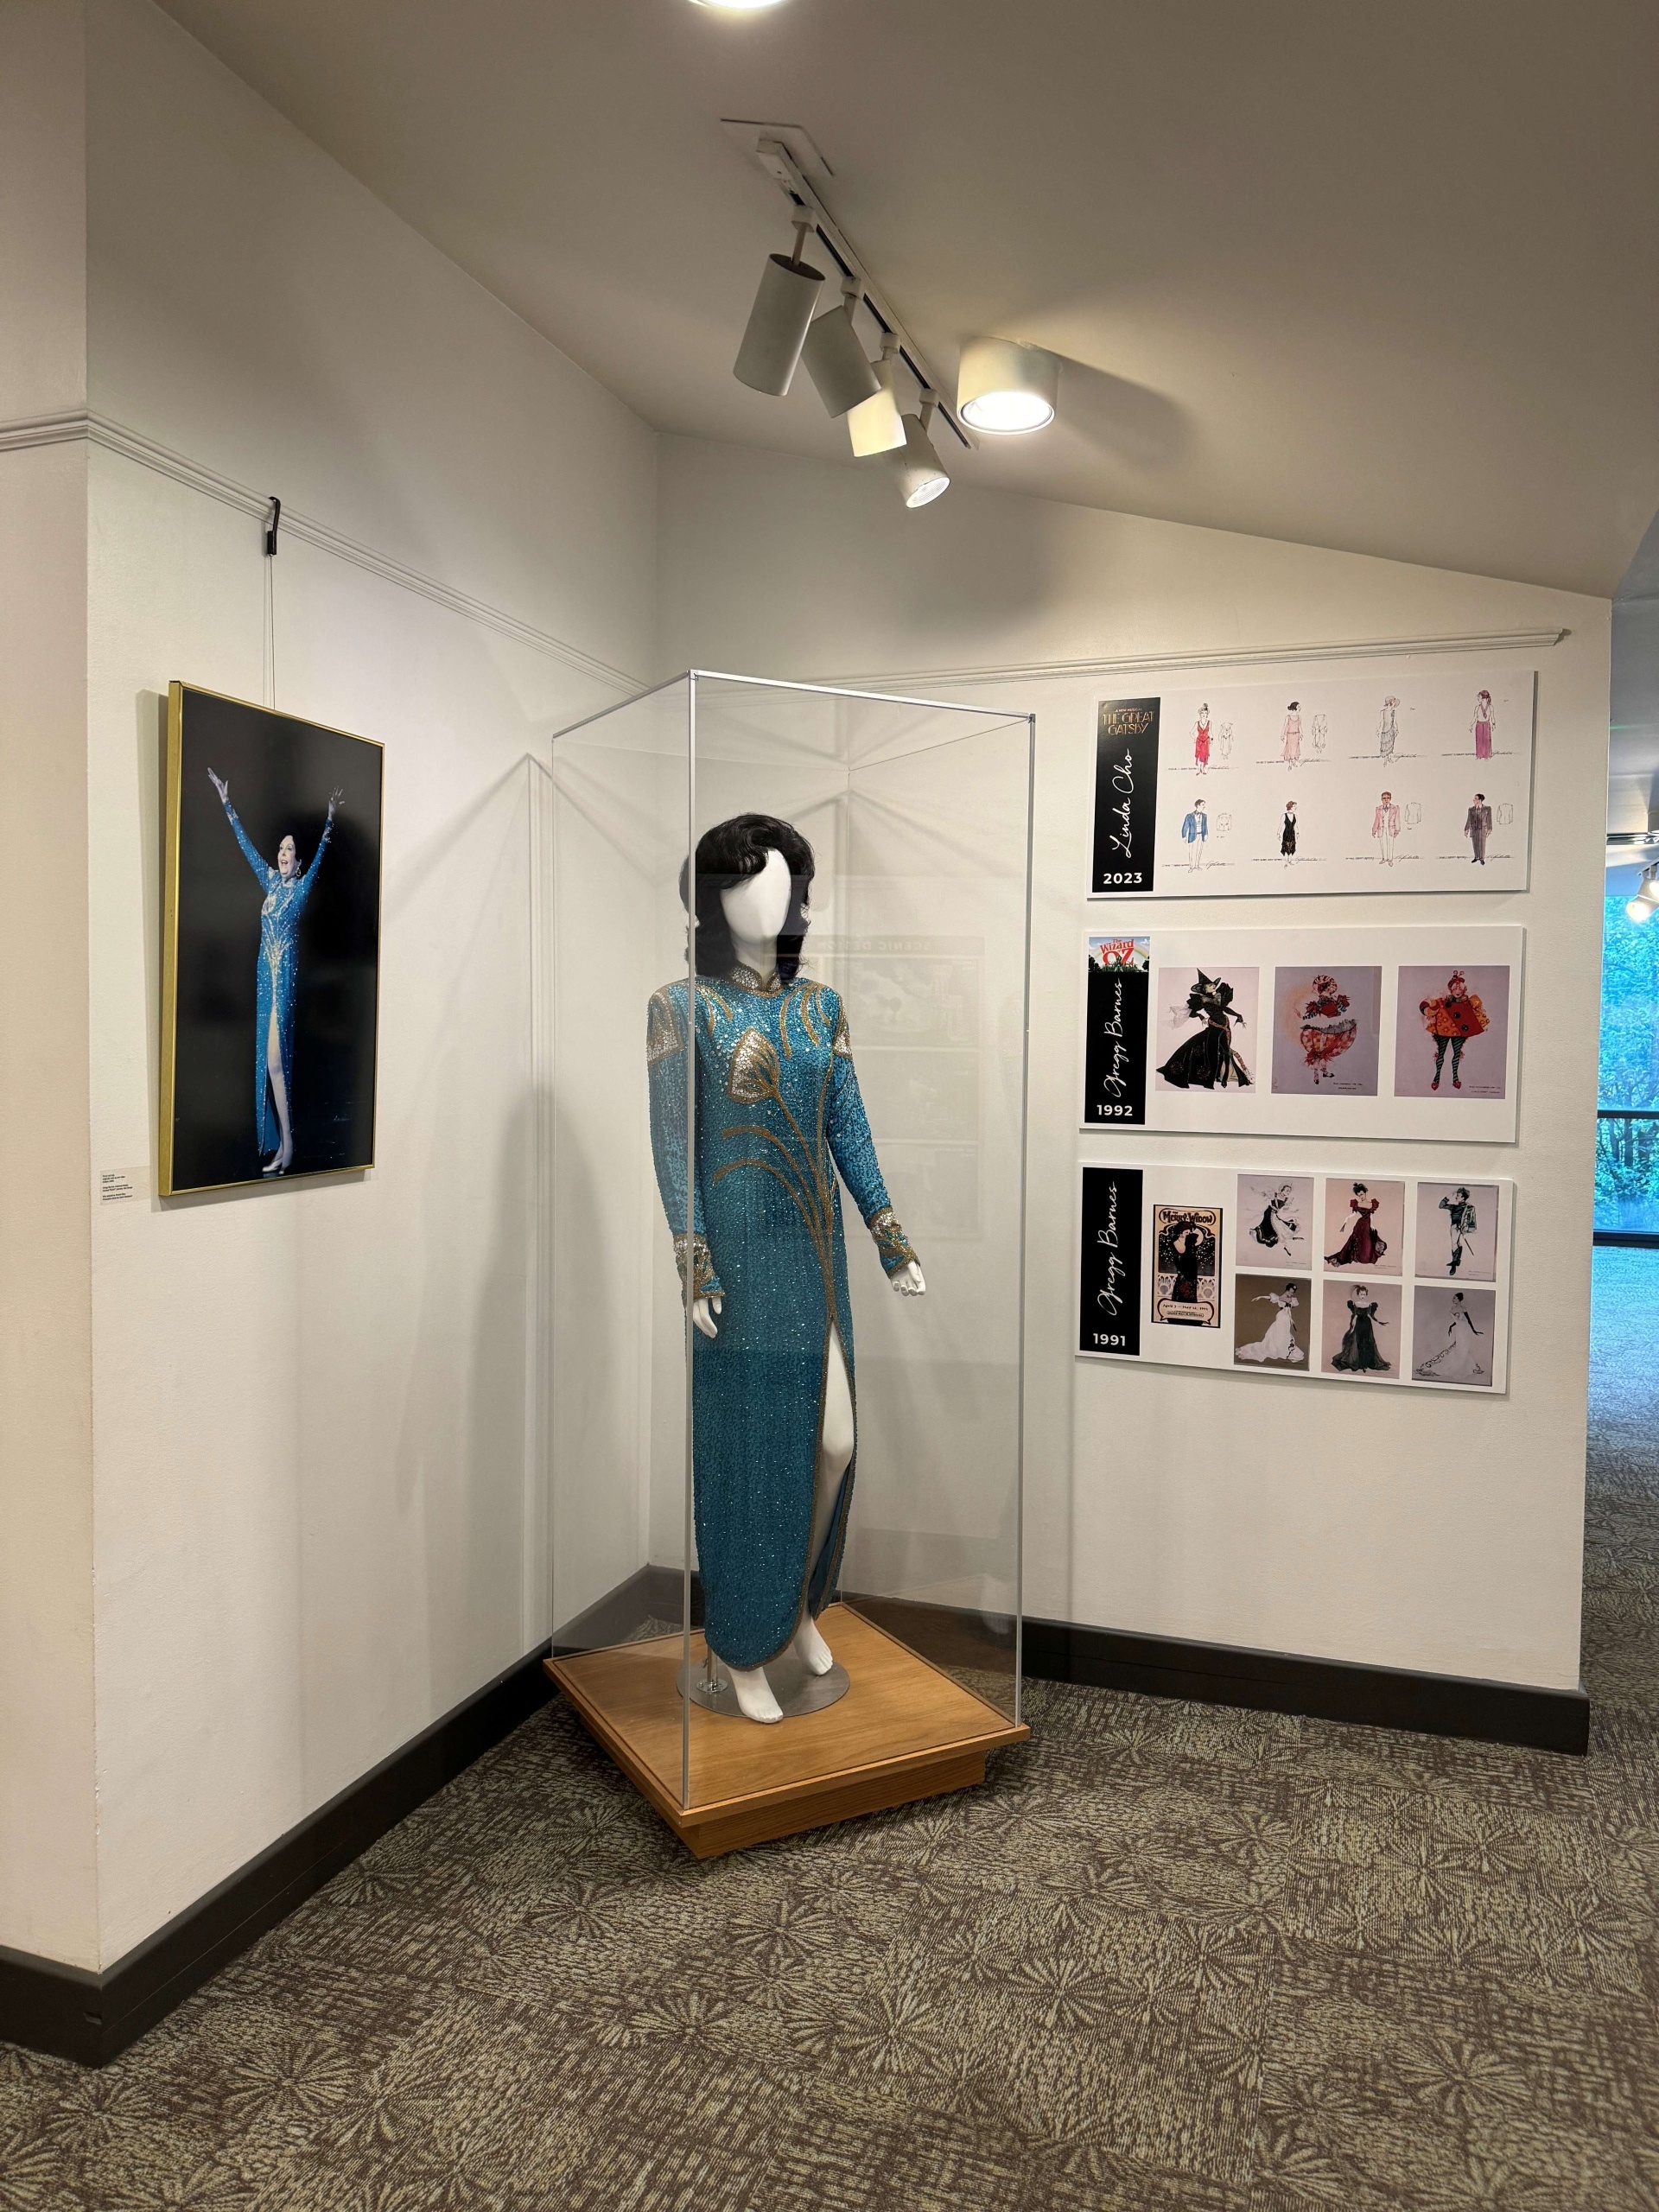 Mannequin wearing a blue and silver sparkle dress in a case. A picture on the left wall is of Anne Miller wearing the dress. Pictures on the right wall show artist costume sketches for several shows.